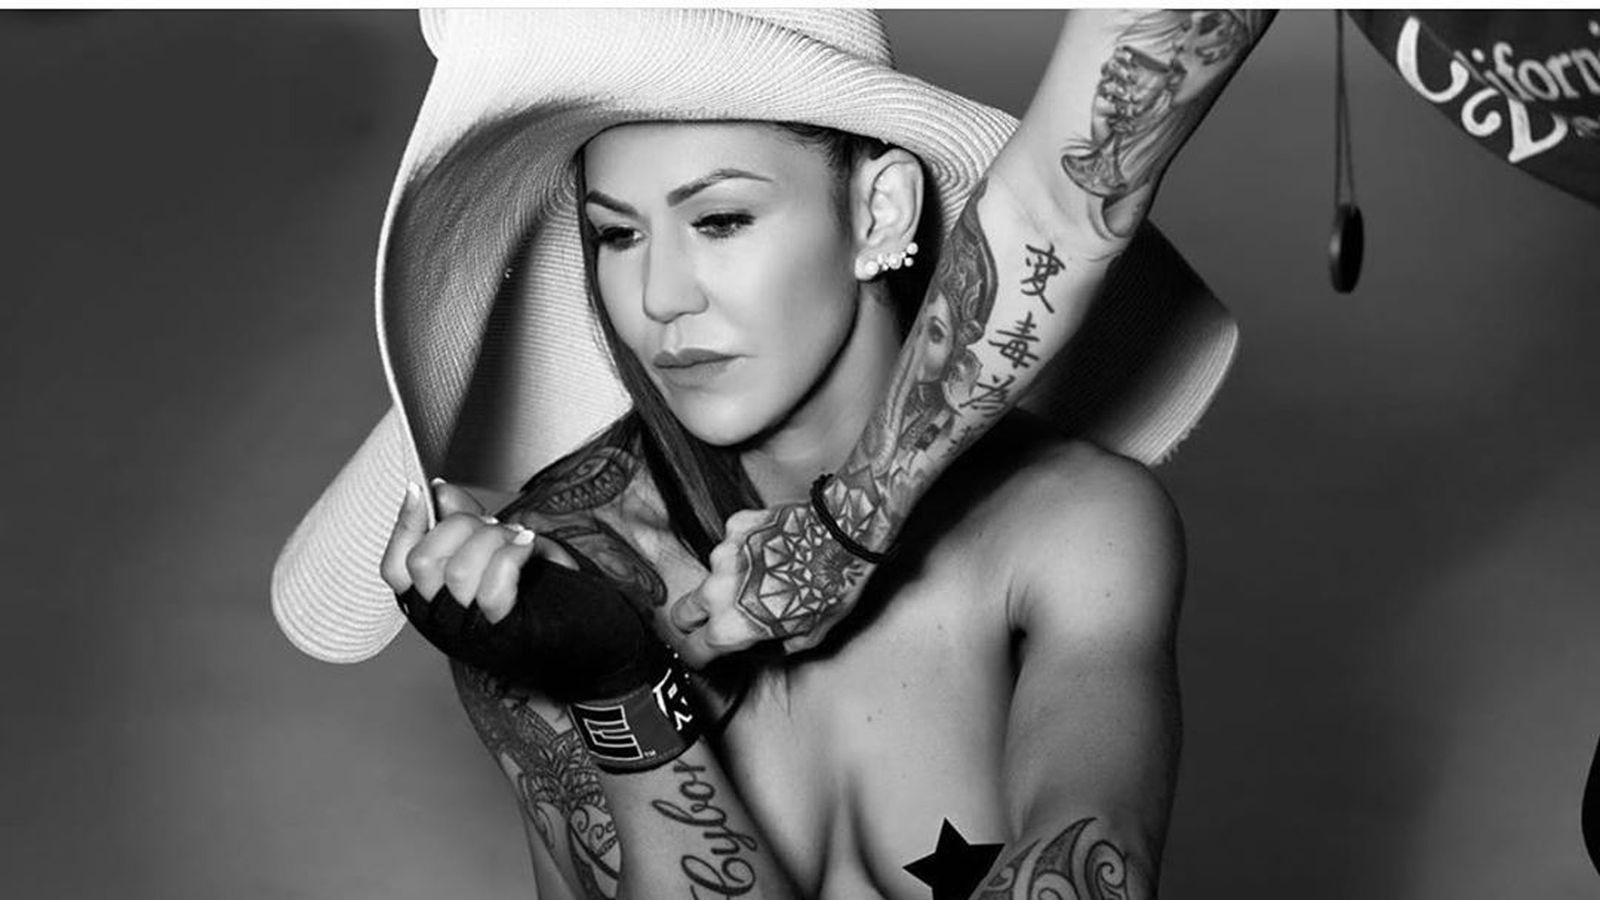 Pic: Cris Cyborg topless photo shoot features new look at former UFC champ.